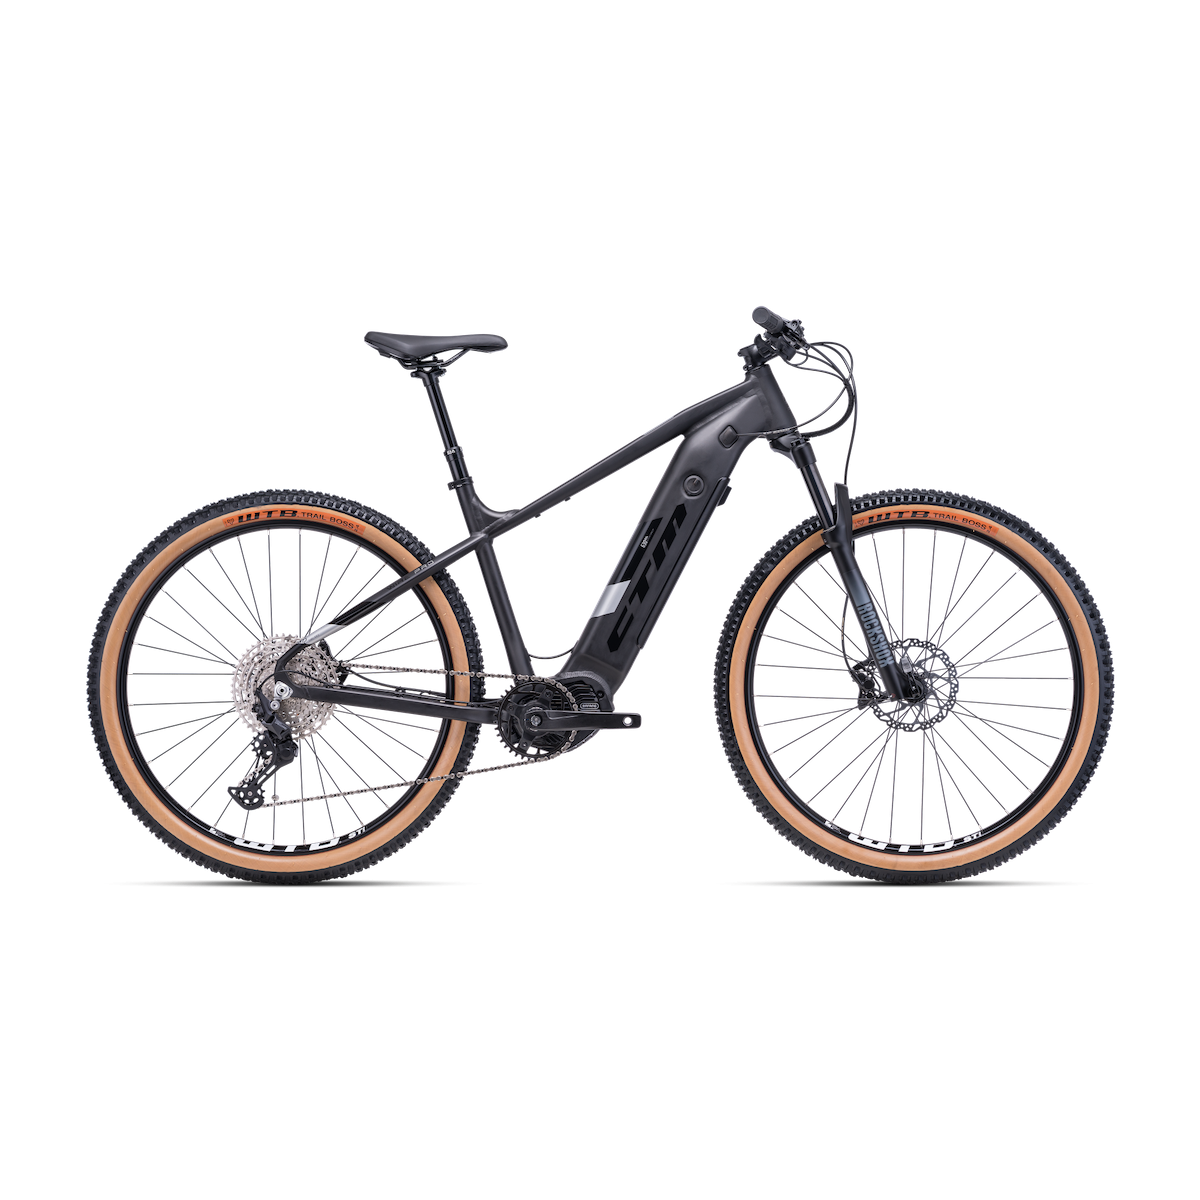 CTM WIRE PRO 29 electric bicycle - black/grey